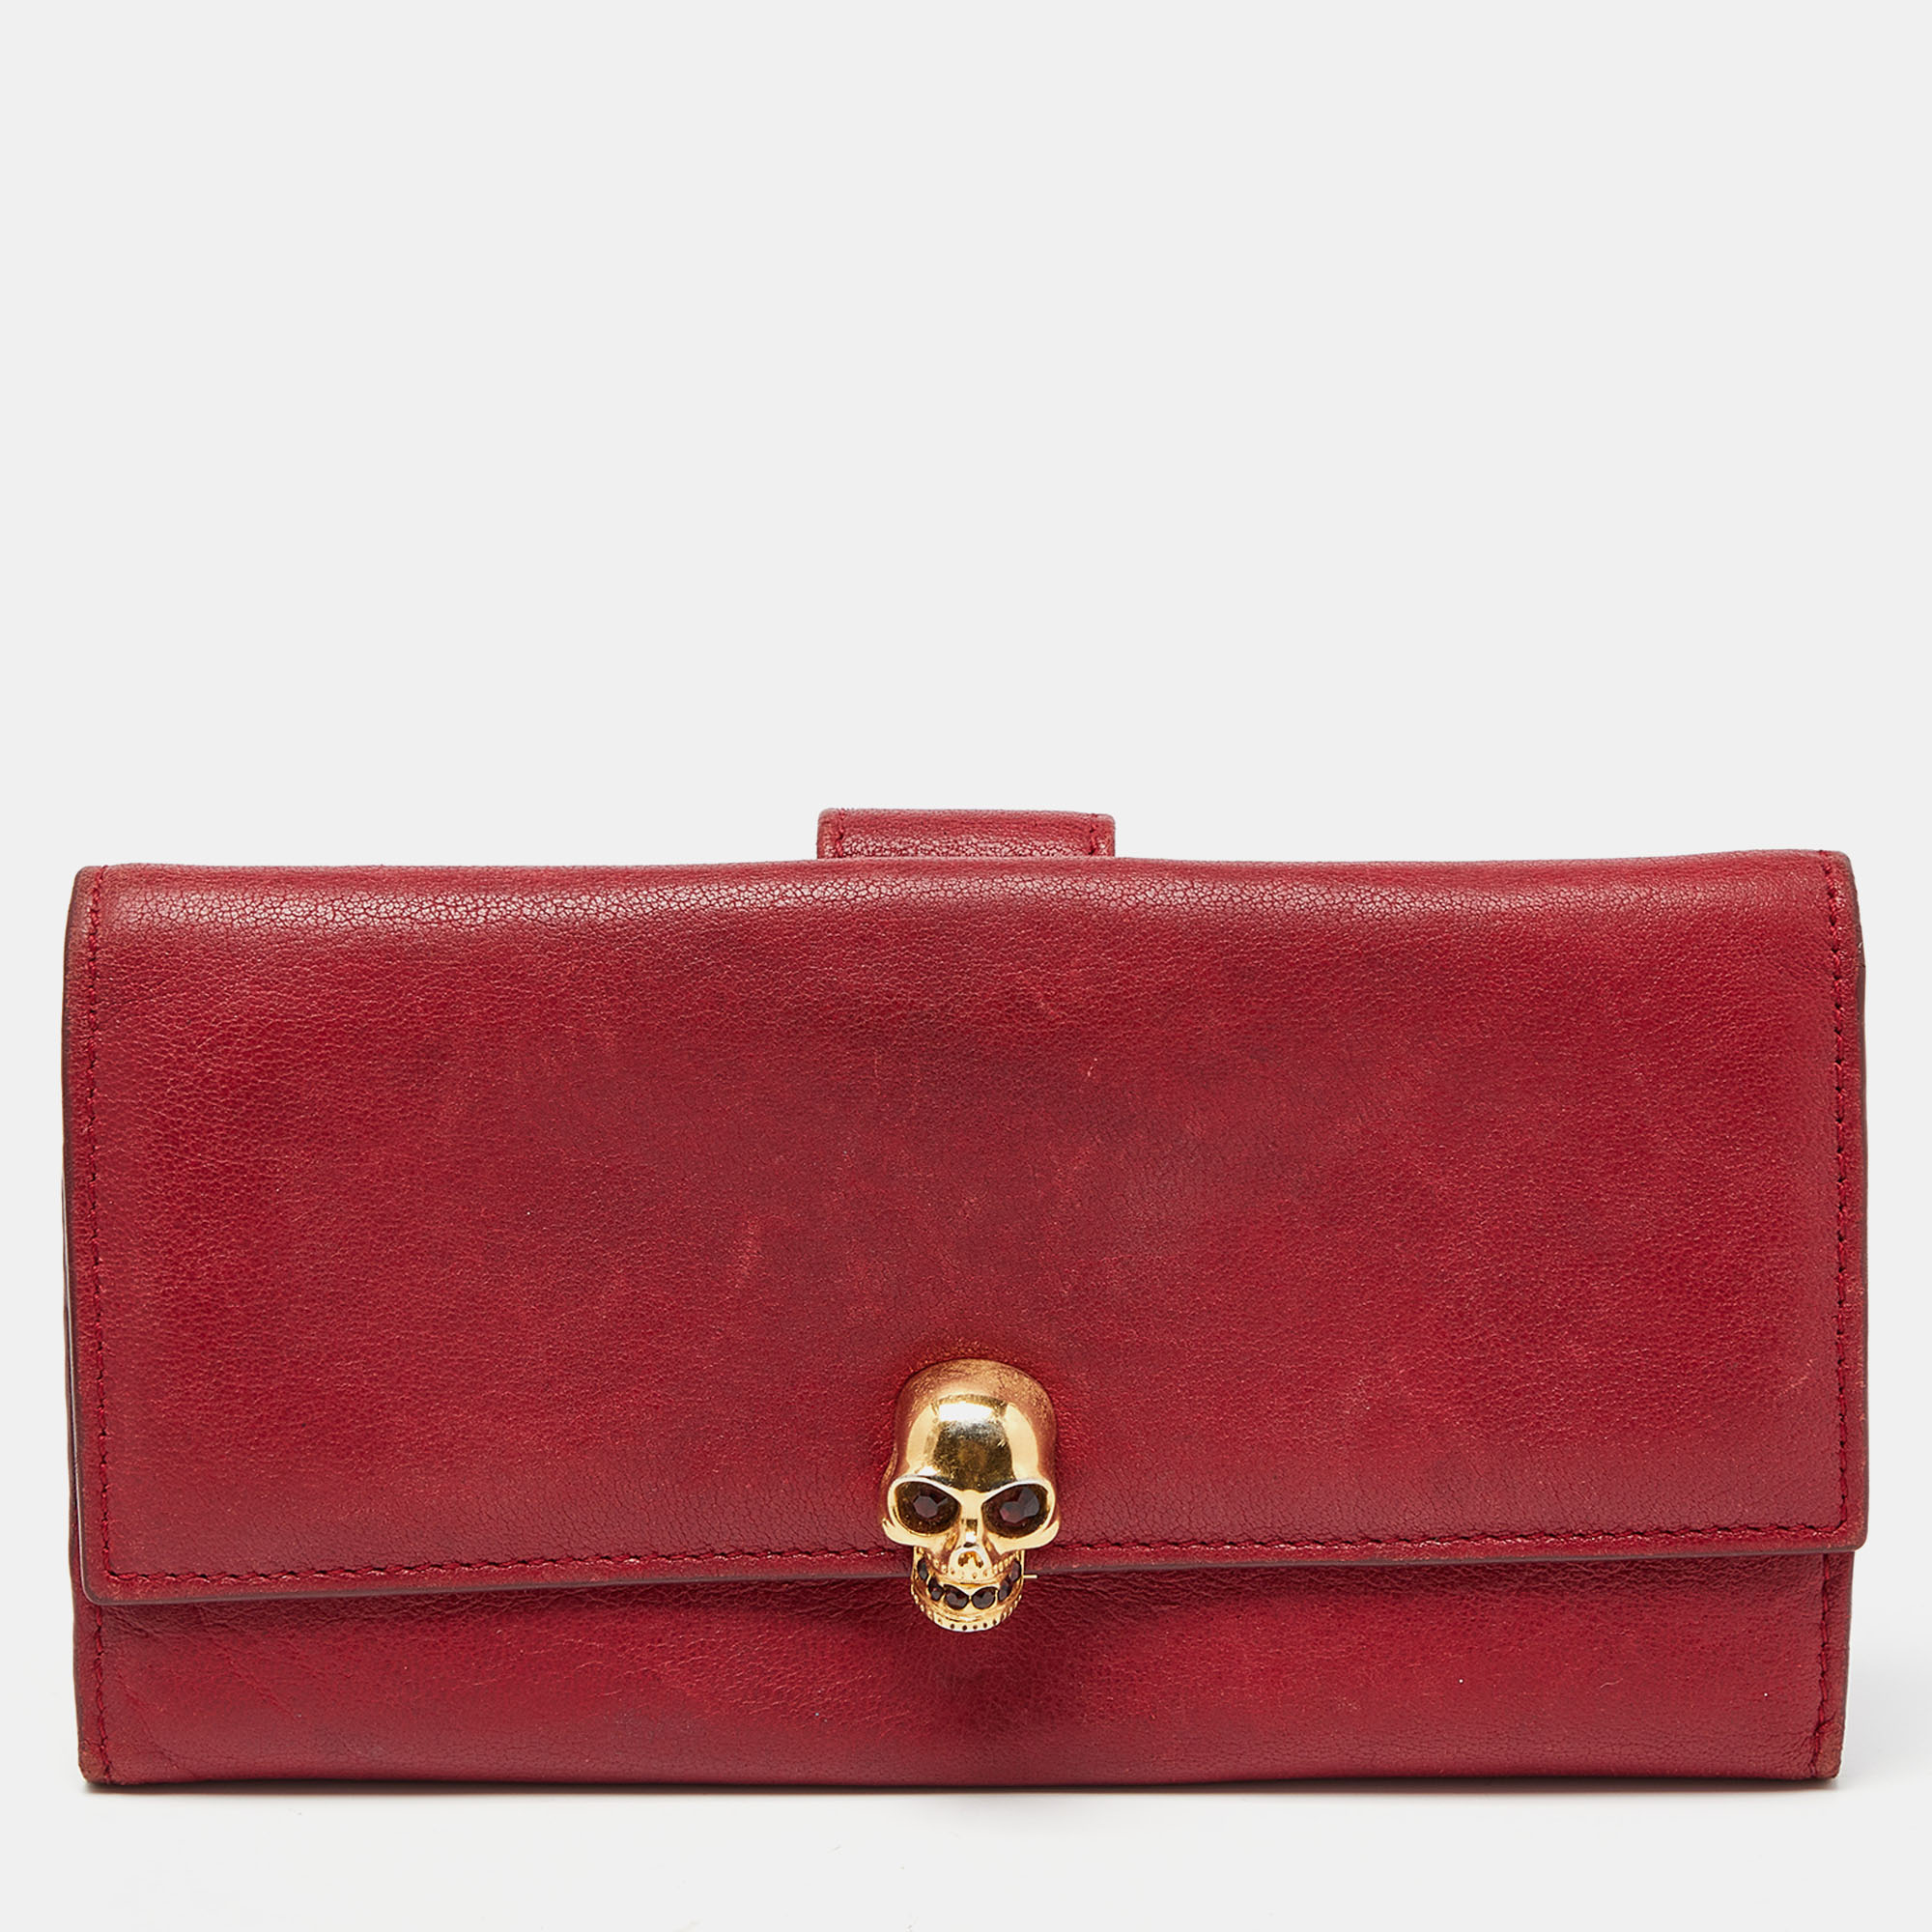 Pre-owned Alexander Mcqueen Red Leather Skull Continental Wallet